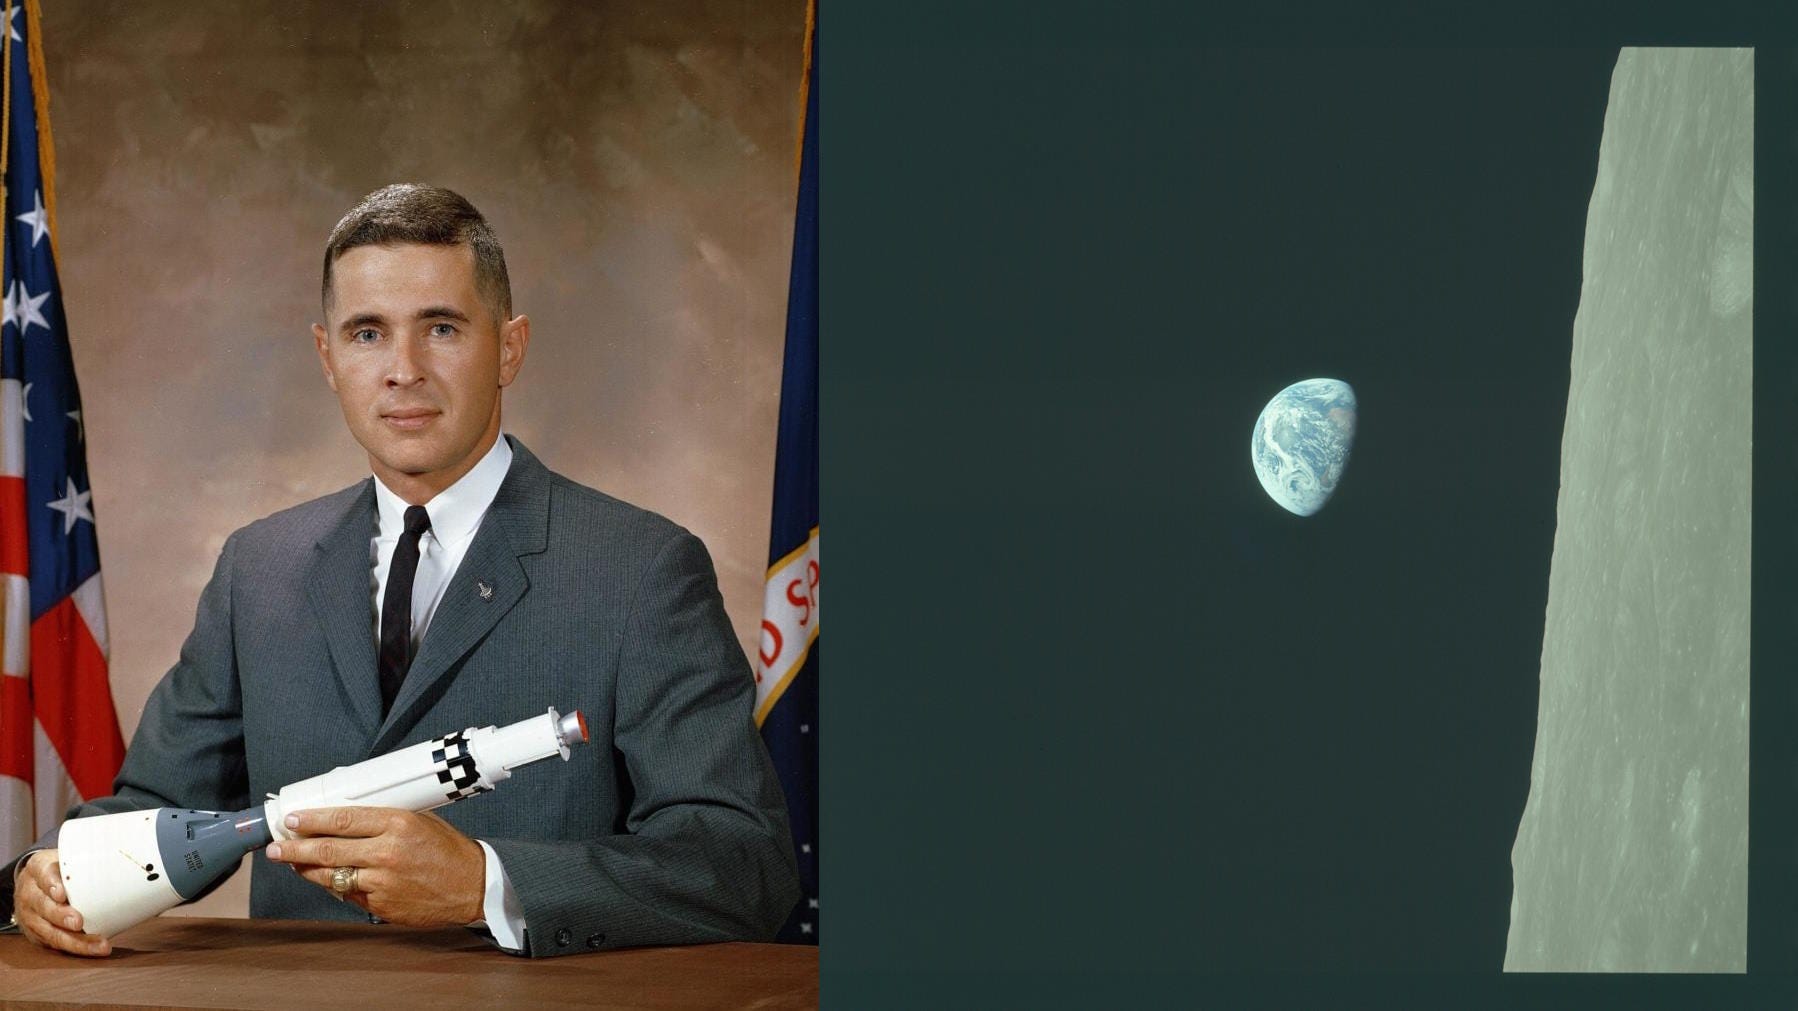 RIP Apollo 8 astronaut Bill Anders who rediscovered Earth